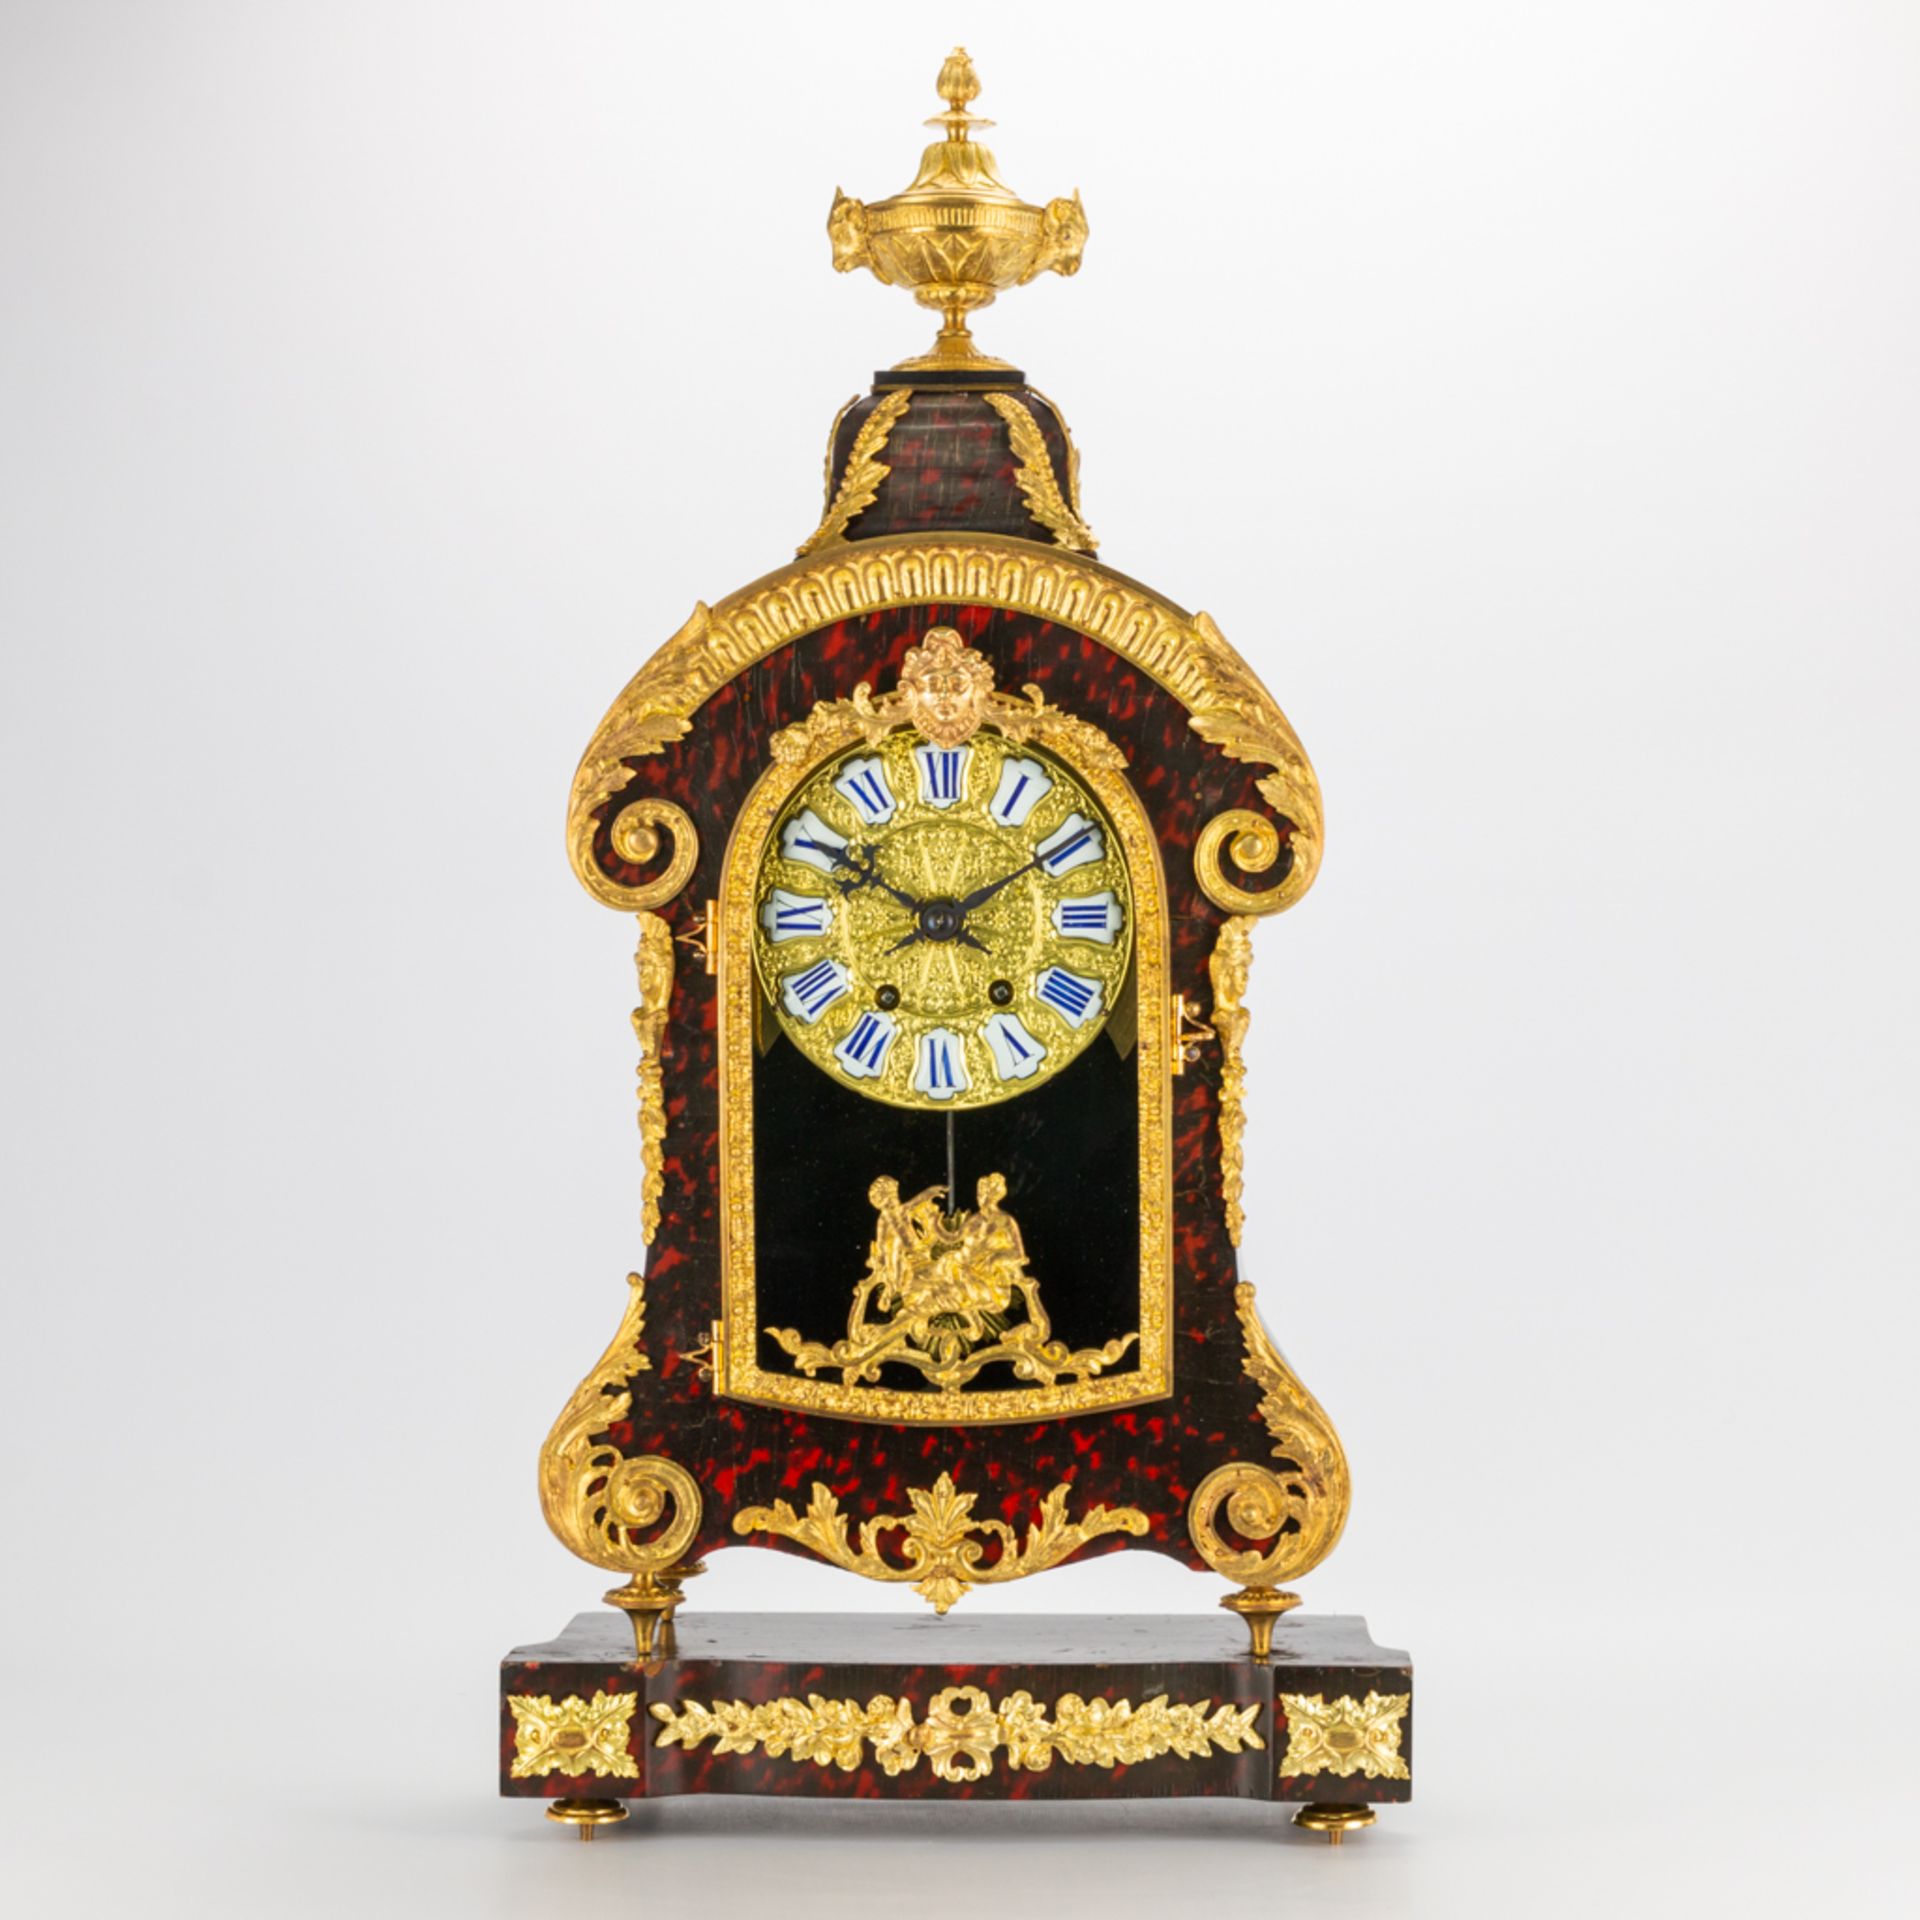 A table clock on console, made of tortoise shell and mounted with ormolu bronze. 19th century. (14,5